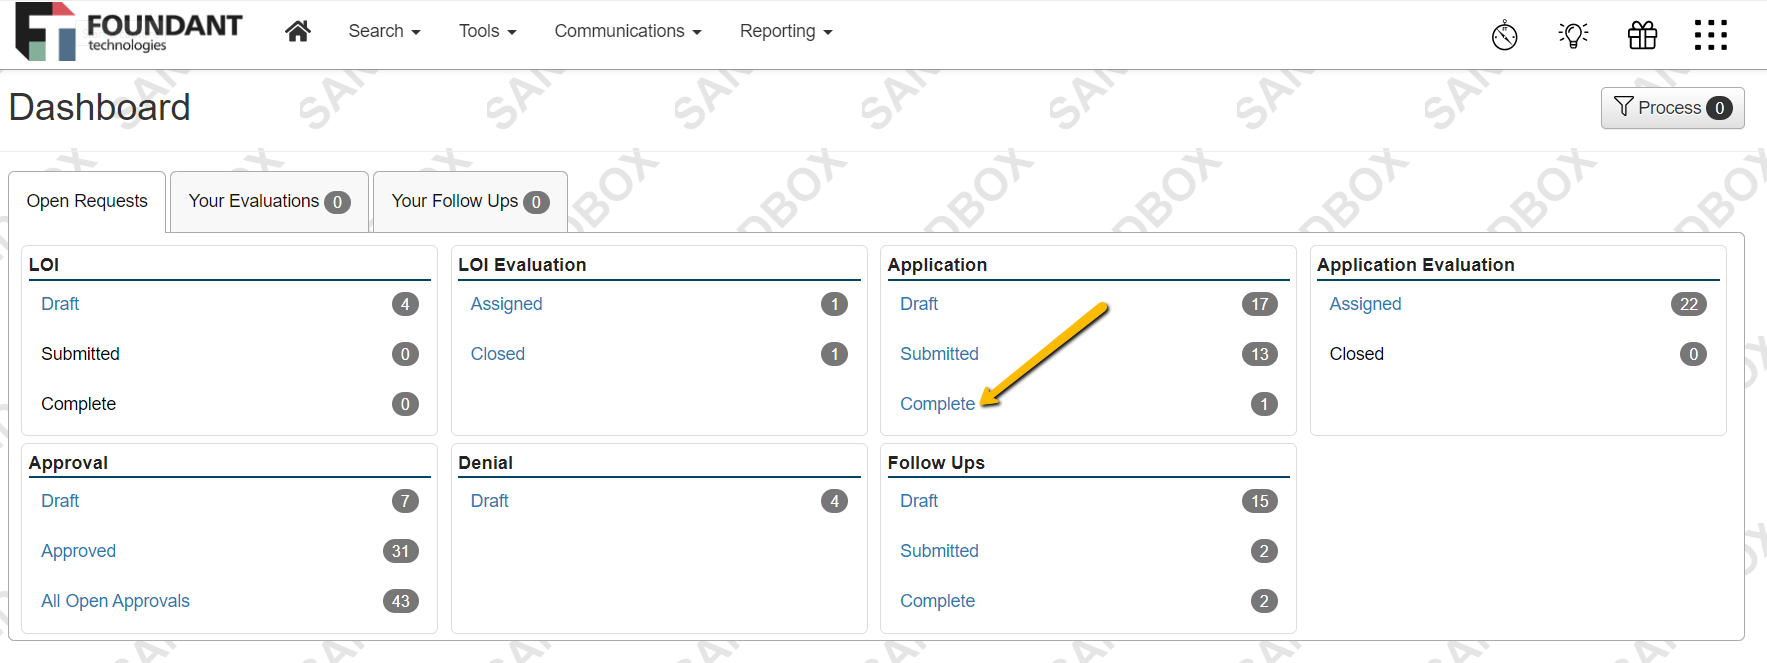 Application Complete workload page